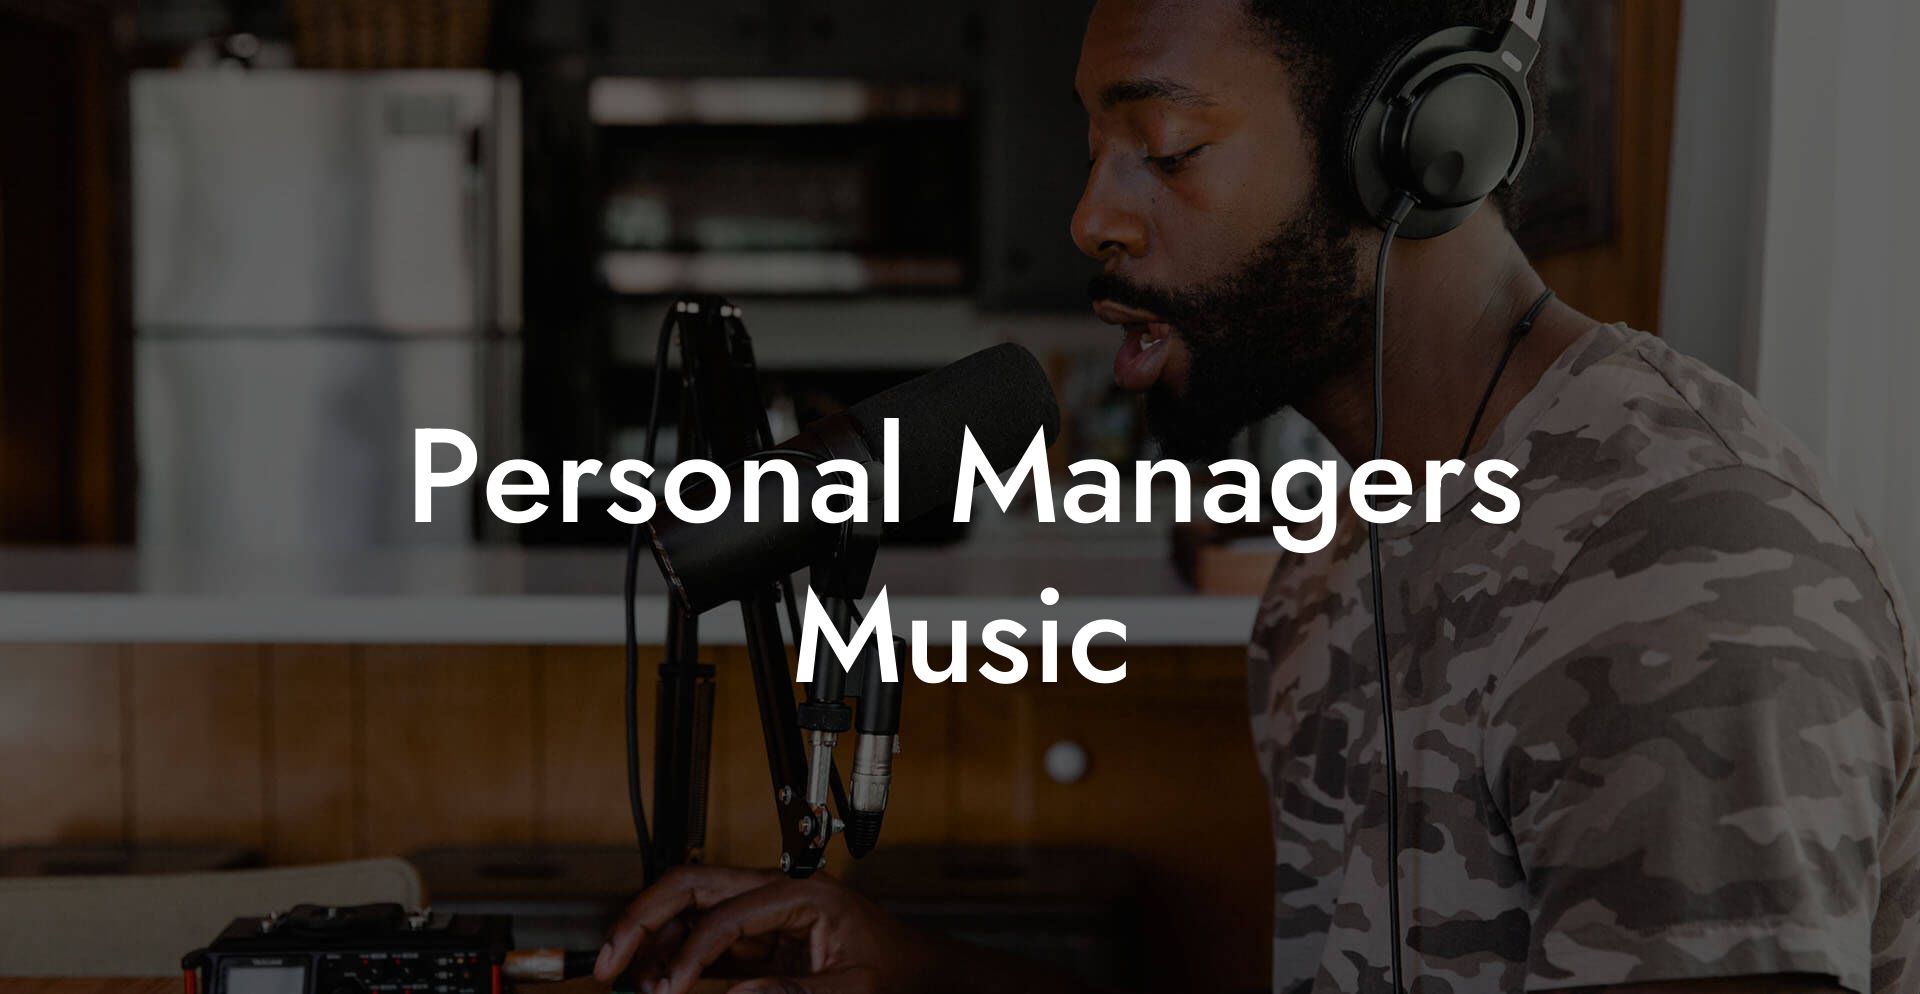 Personal Managers Music